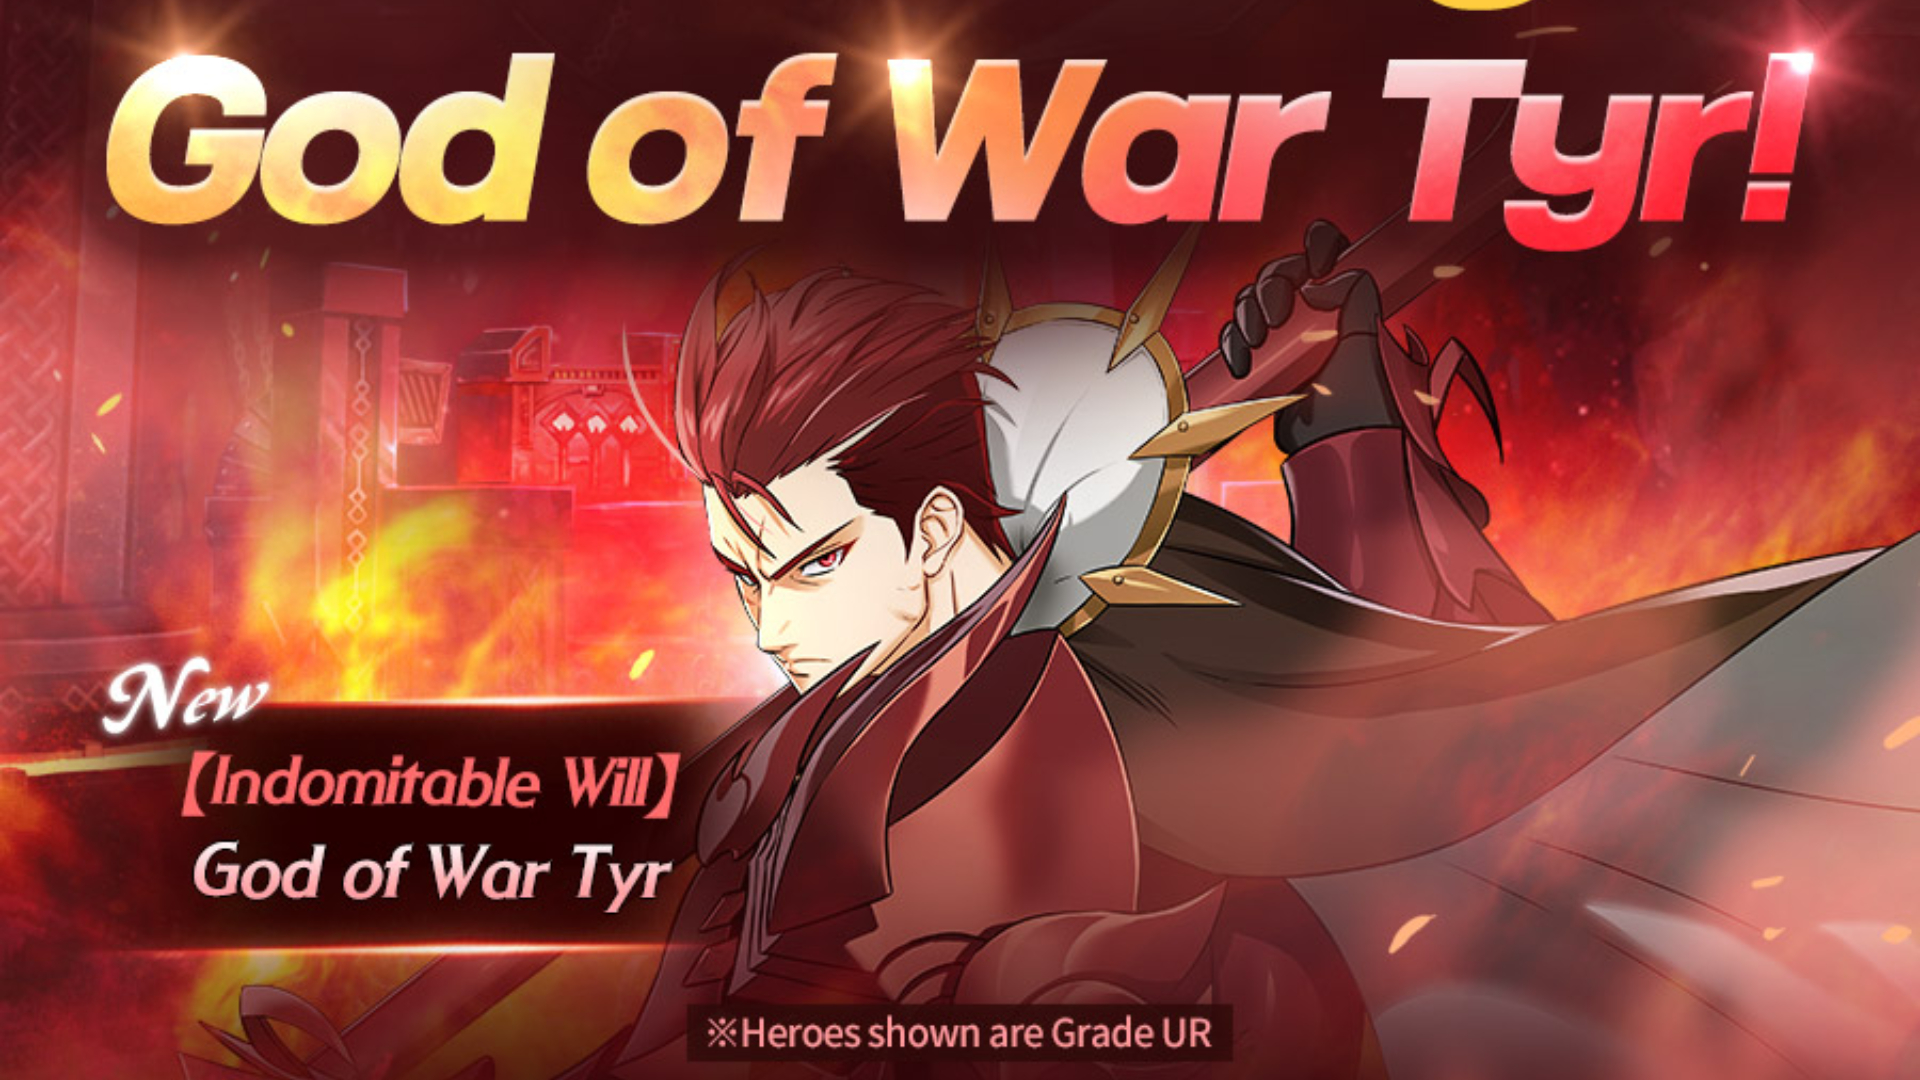 The Seven Deadly Sins: Grand Cross on X: 🧵 New Unity Added! 🧵  [Indomitable Will] God of War Tyr, brings a new Unity effect! ✨ What will  the next Unity effect be?